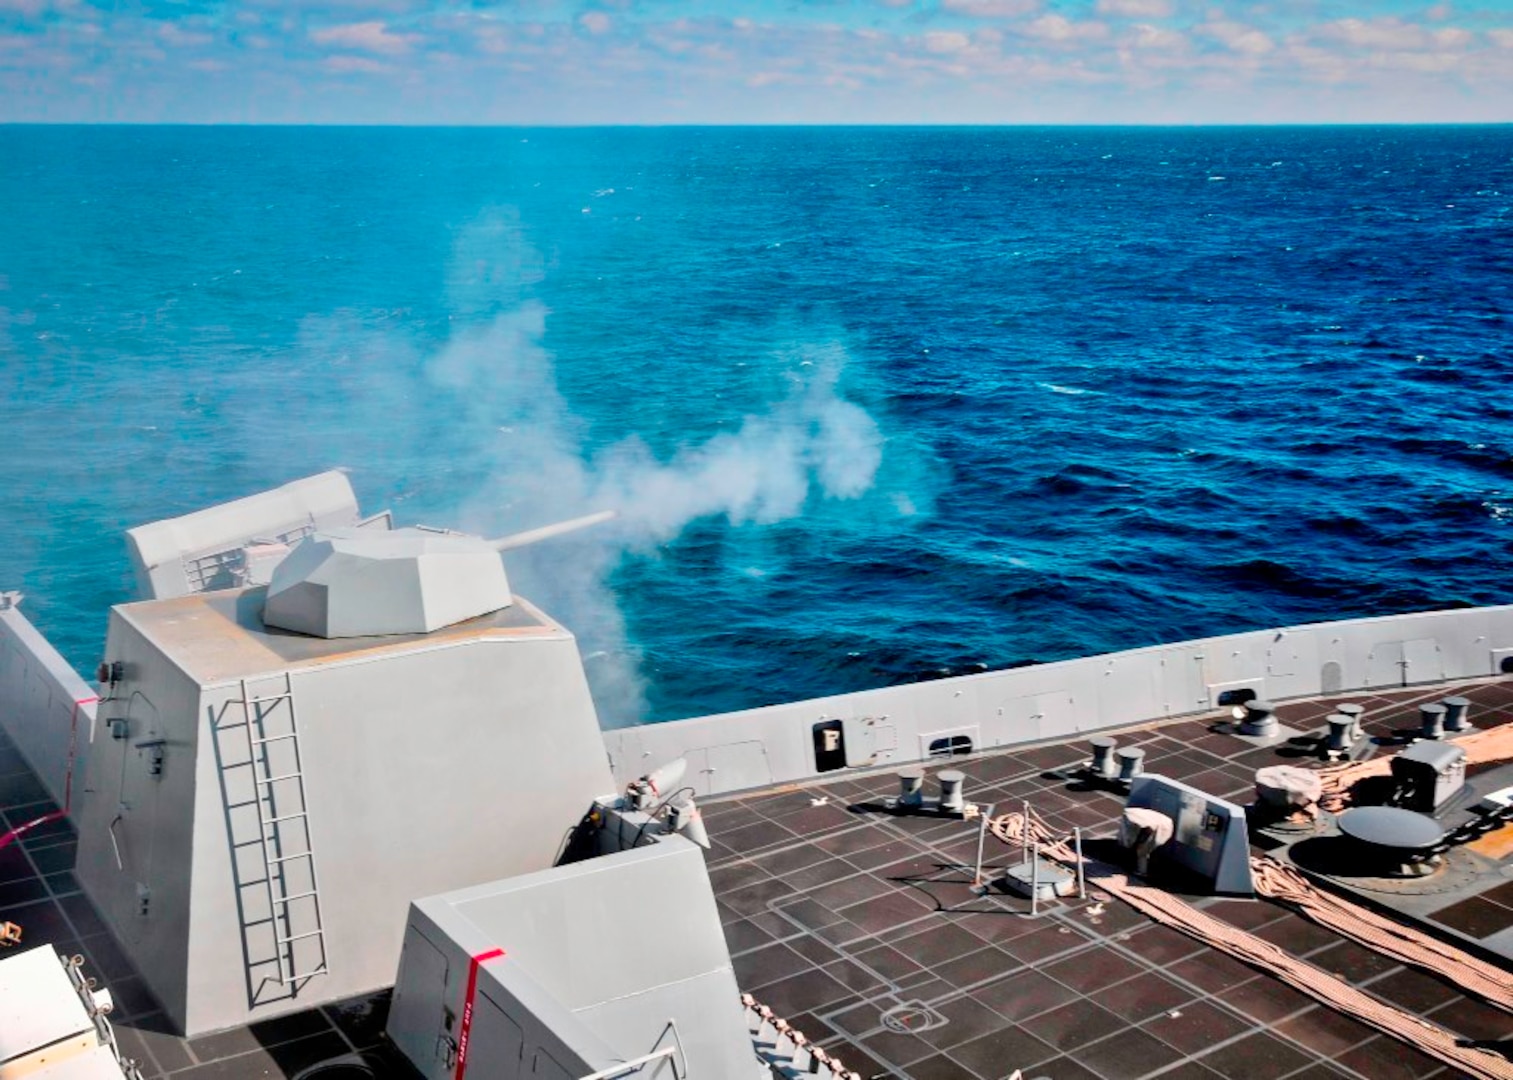 ATLANTIC OCEAN – The amphibious transport dock ship USS New York (LPD 21) fires its MK46 30mm gun during a live-fire exercise. Navy scientists and engineers evaluated a strike group’s Aegis combat system and gun weapon systems – including the 30 millimeter gun – as well as unmanned vehicles integrated with surface and air assets at the 2016 USS Dahlgren demonstration, Aug. 30. The test – made possible by a cybernetic laboratory called USS Dahlgren – proved engagement coordination across the simulated battlegroup and live fire destruction of multiple targets from two combatants utilizing two different gun based systems. “This has been five to six years in the making and couldn't come at a better time as we see real-world events such as the recent small boat incursions in the Middle East, highlighting the need for the Fleet,” said Capt. Brian Durant, NSWCDD commanding officer. (U.S. Navy photo by Mass Communication Specialist 2nd Class Cyrus Roson/Released)